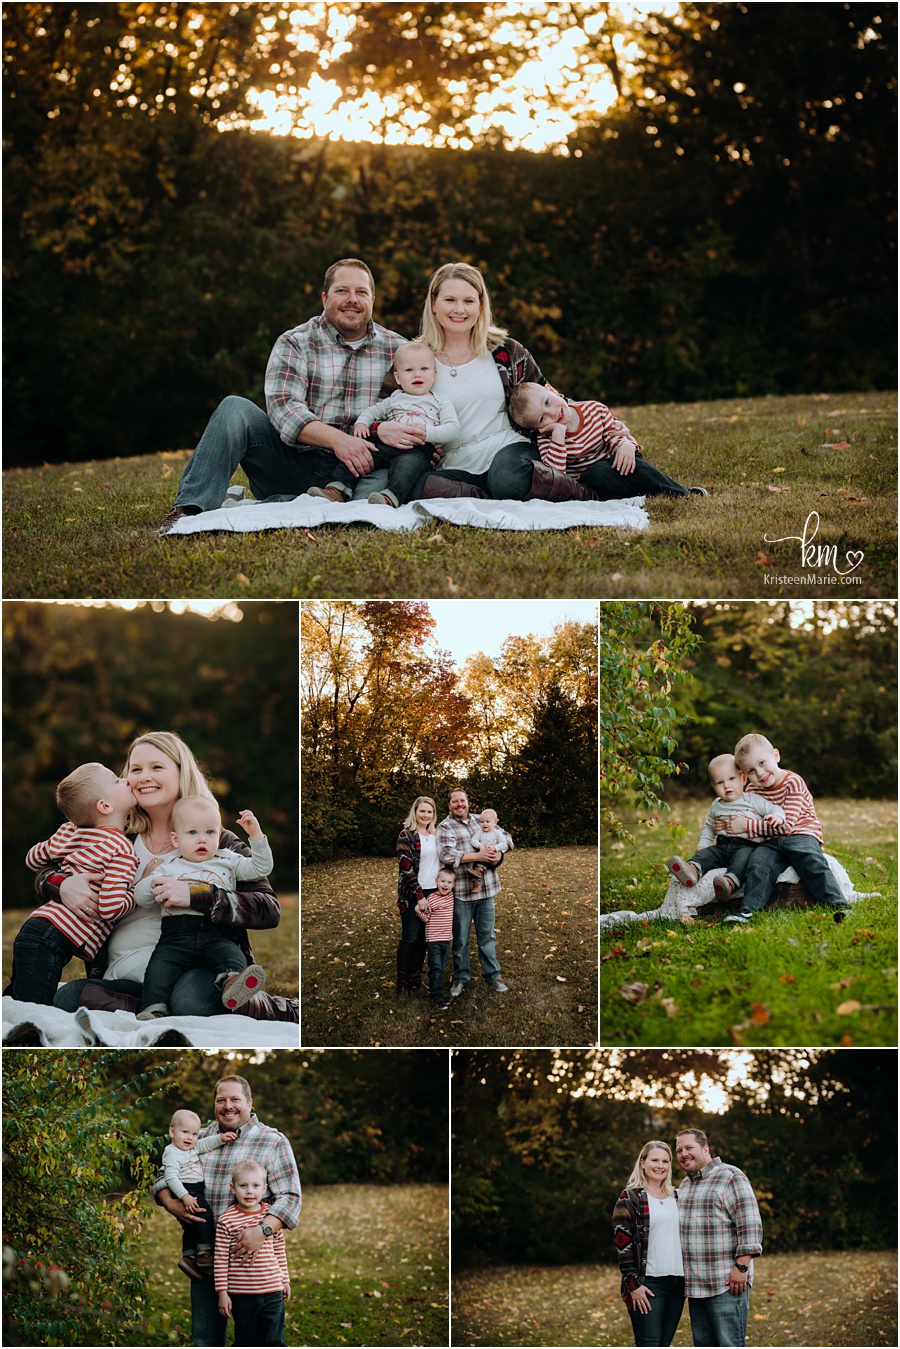 Outdoor family pictures at sunset - Indianapolis, IN 